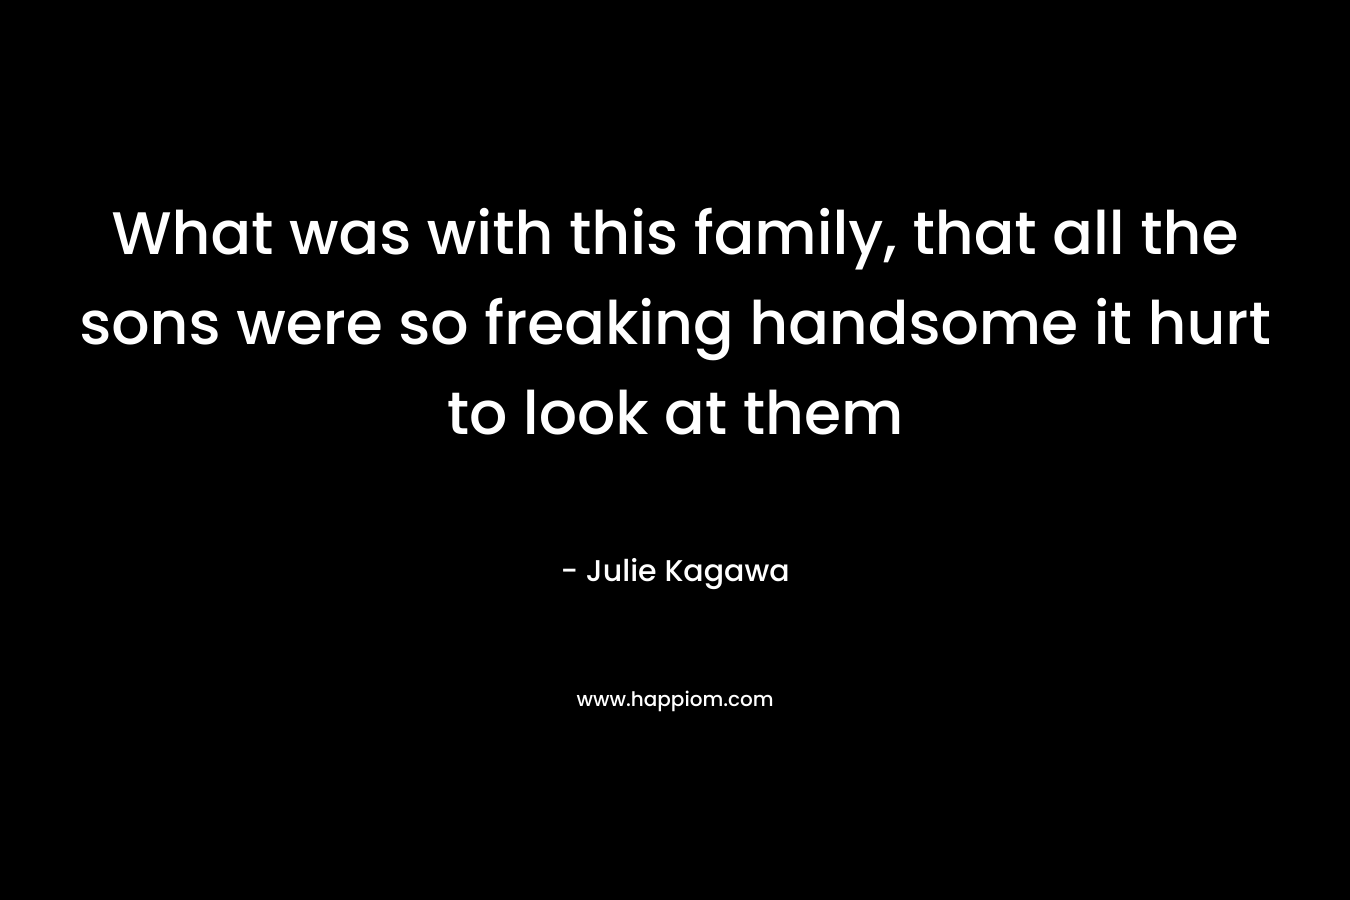 What was with this family, that all the sons were so freaking handsome it hurt to look at them – Julie Kagawa